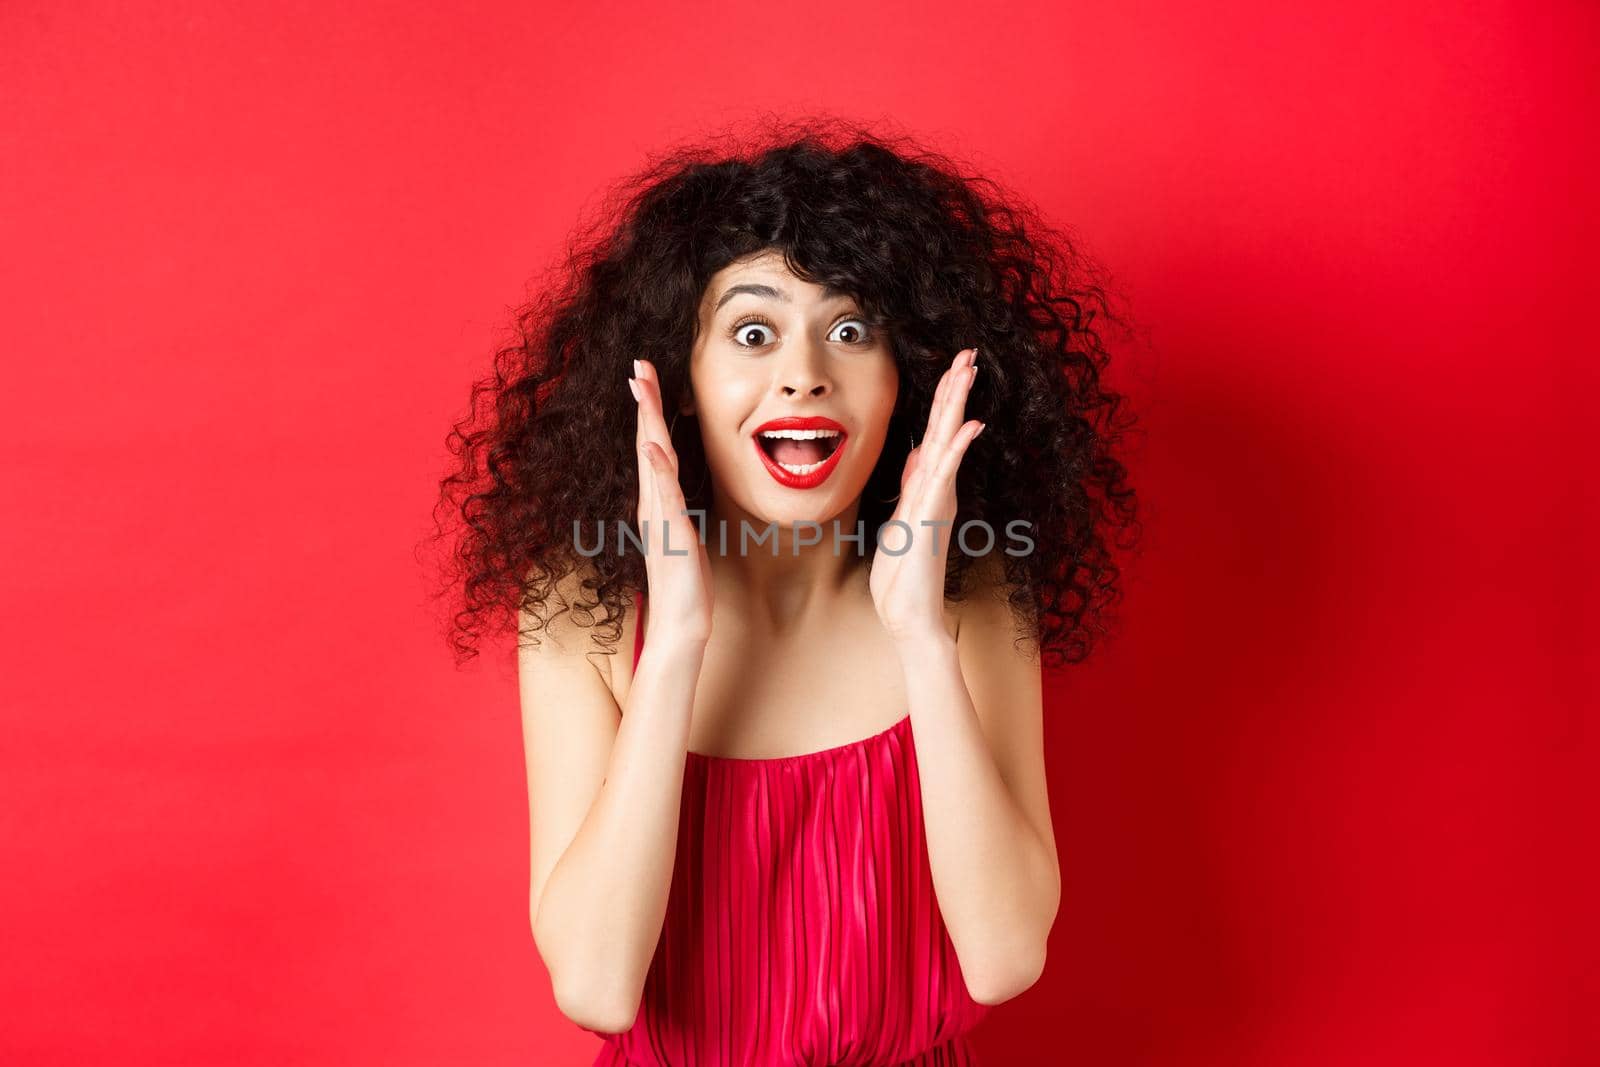 Close-up of surprised beautiful woman, screaming of amazement and looking at promo offer, standing in red dress and lipstick, studio background.